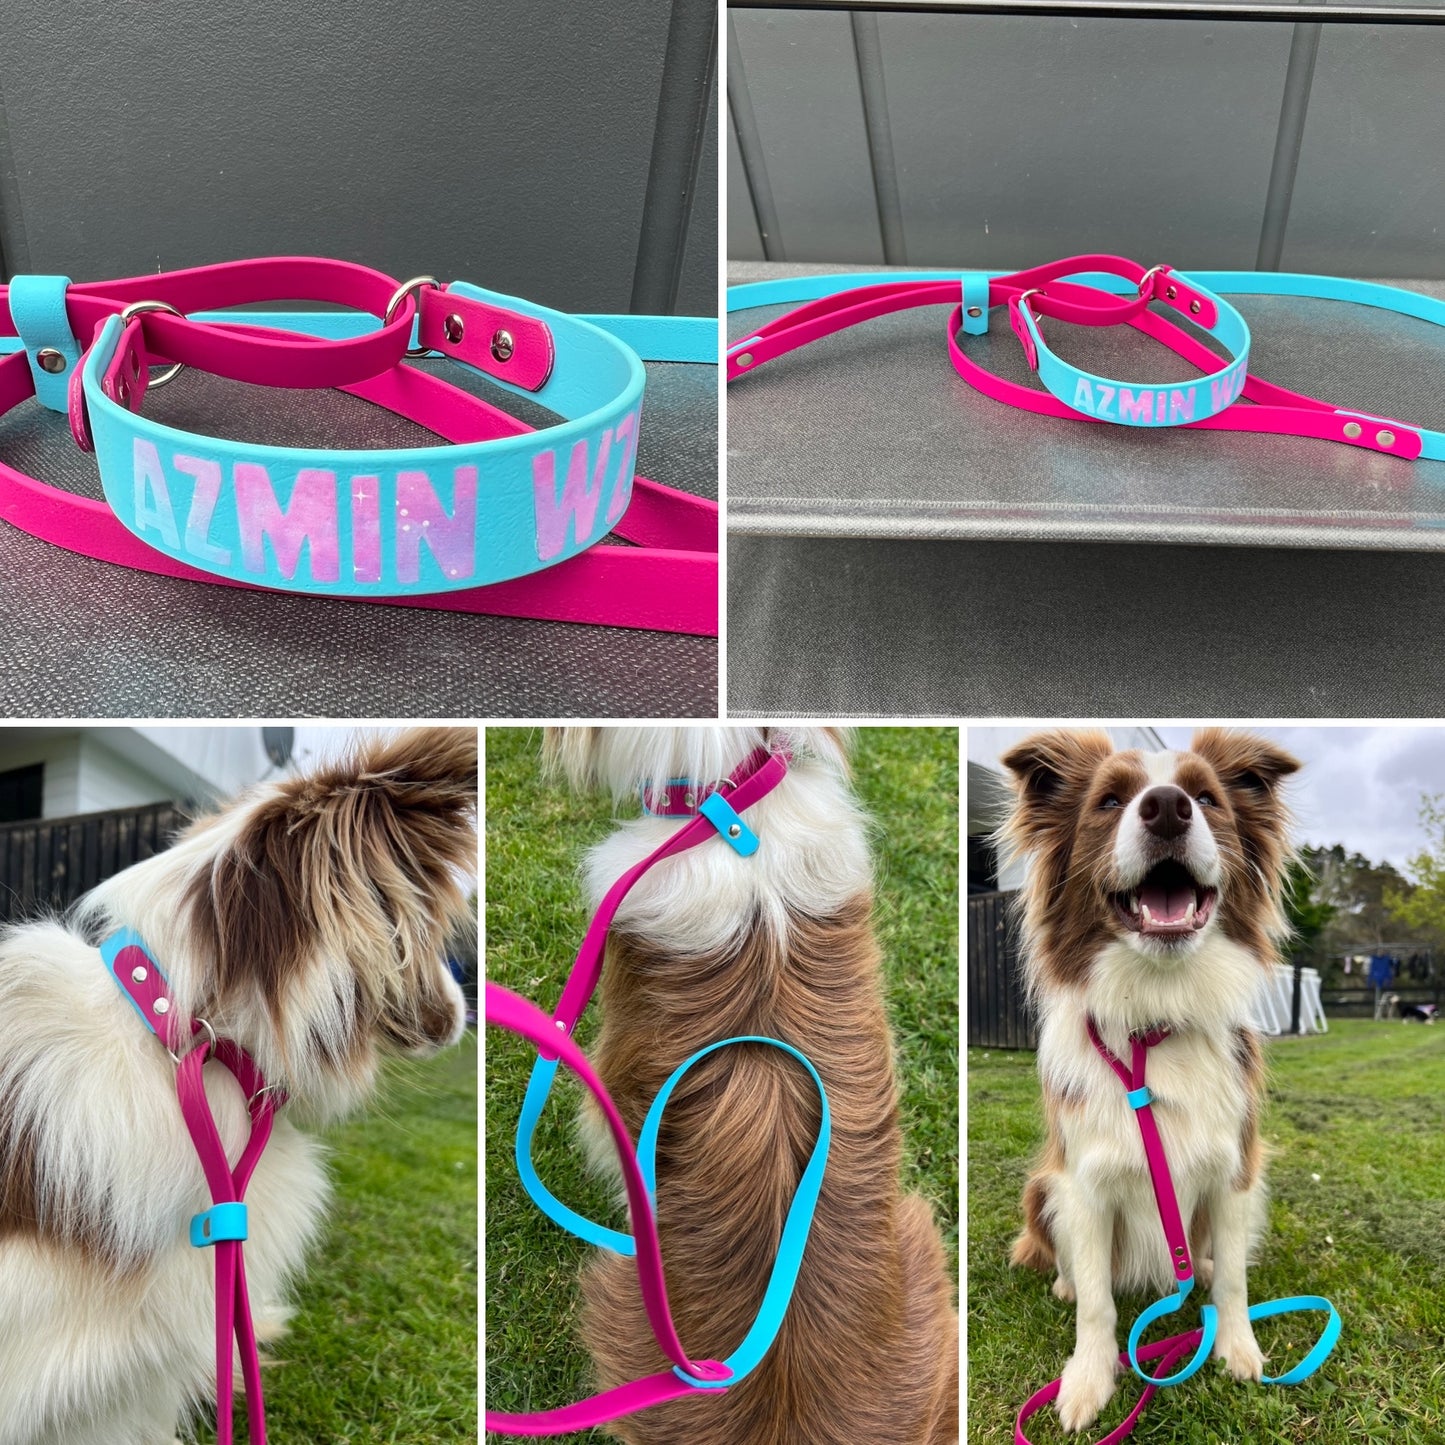 BioThane Martingale Lead - a collar and lead in one!!